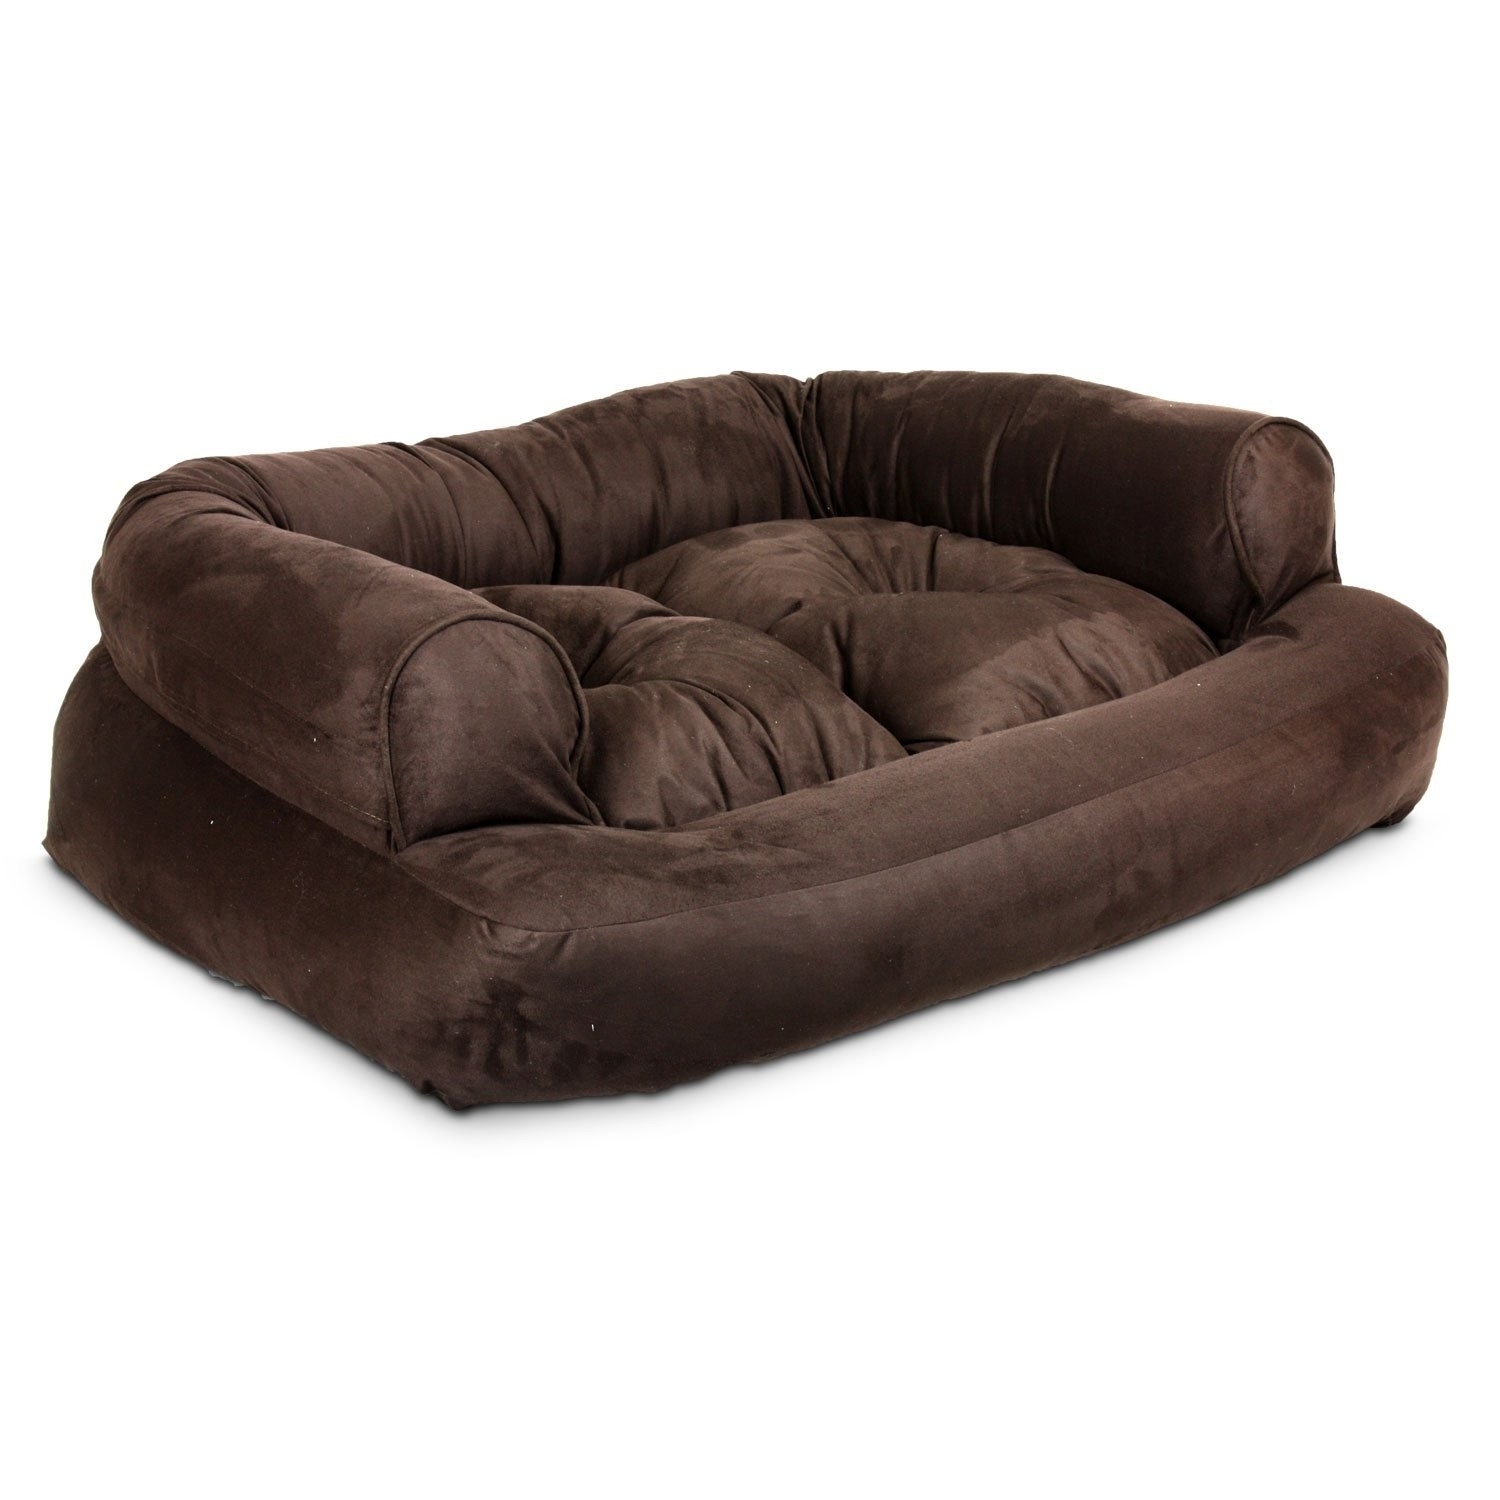 cheap dog couch